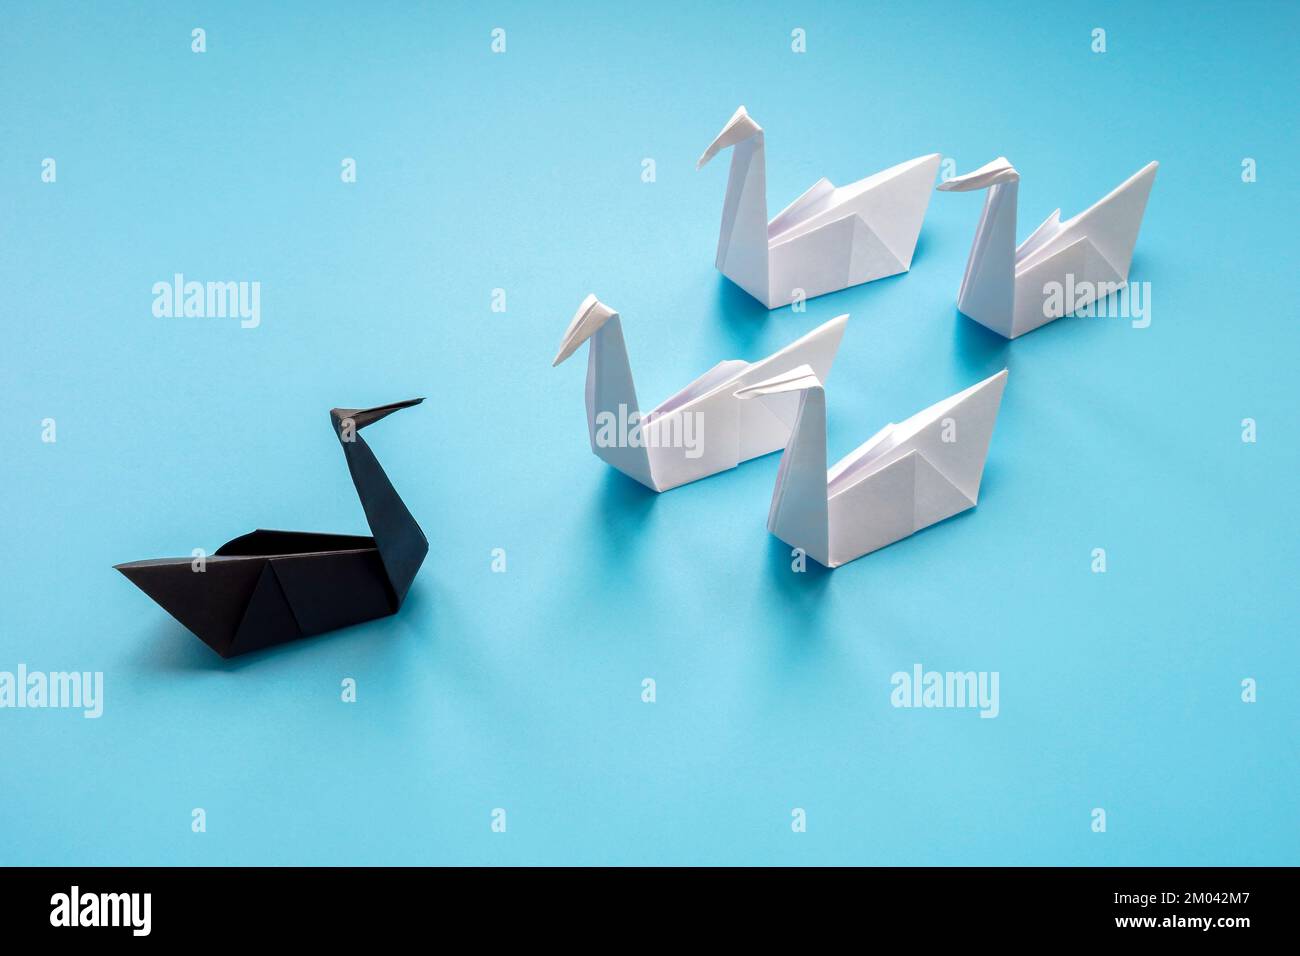 White paper swans and one black as symbol of unpredictable event. Stock Photo